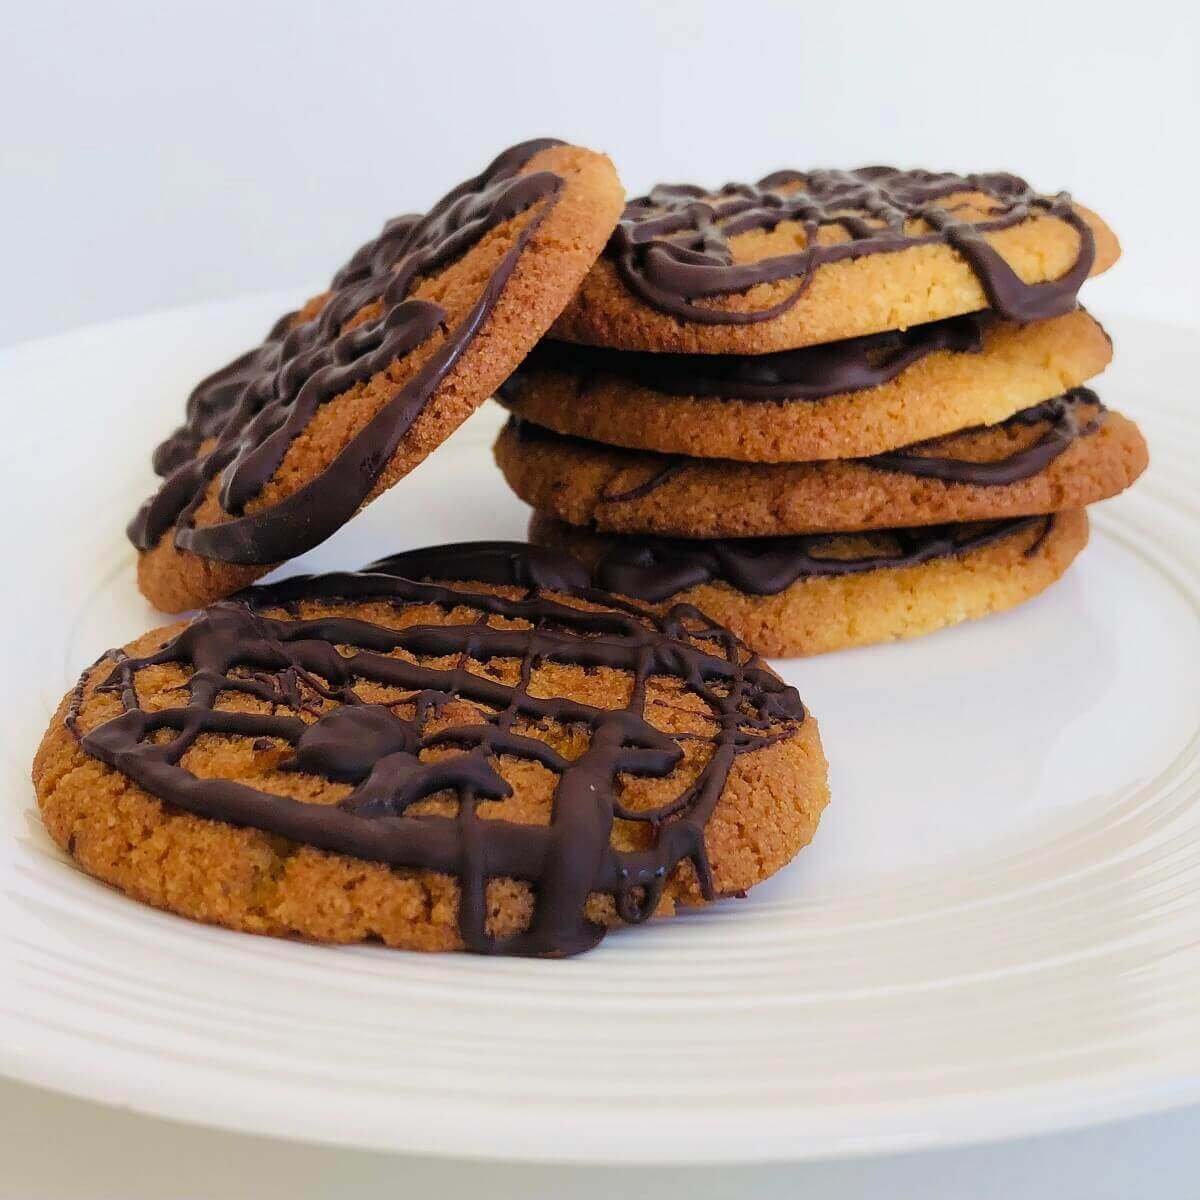 Six cookies arranged on a white plate.